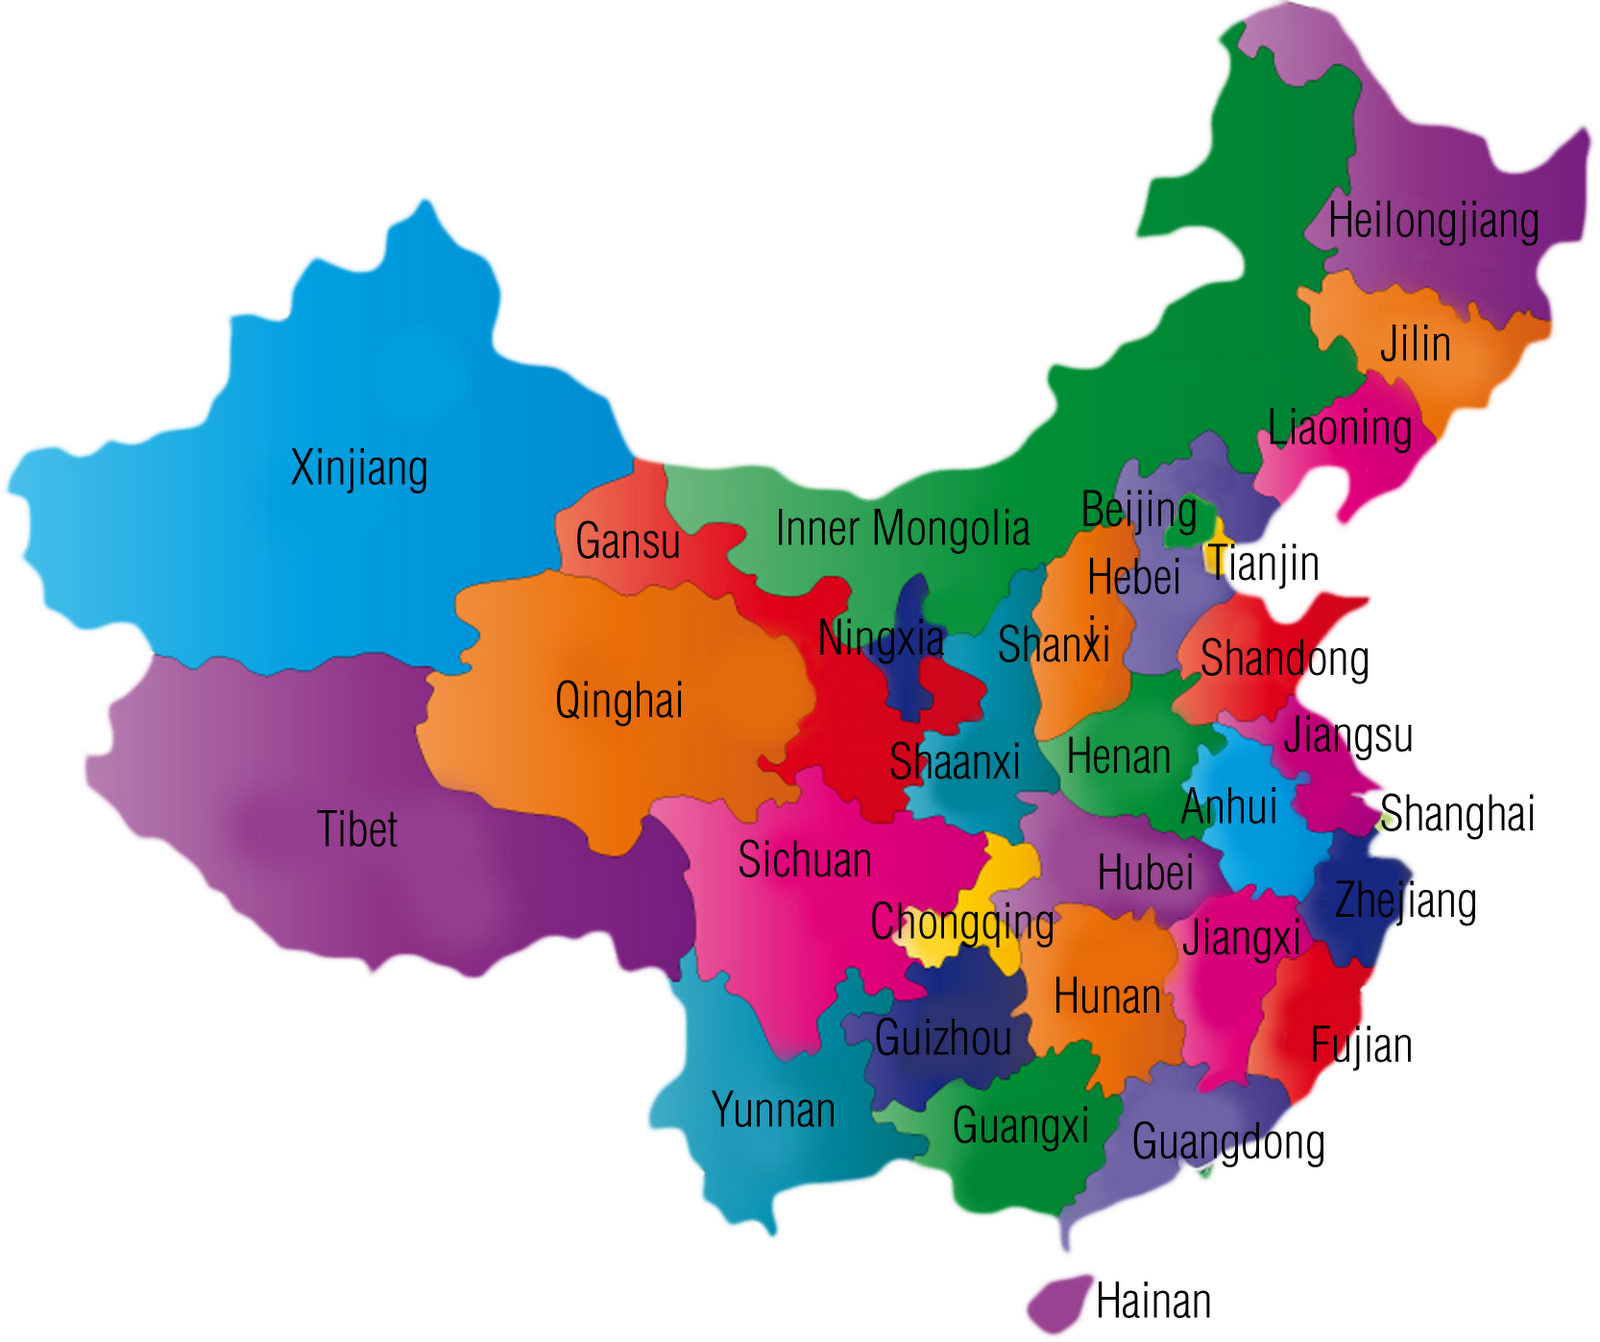 Colorful China Map with Provinces.jpg